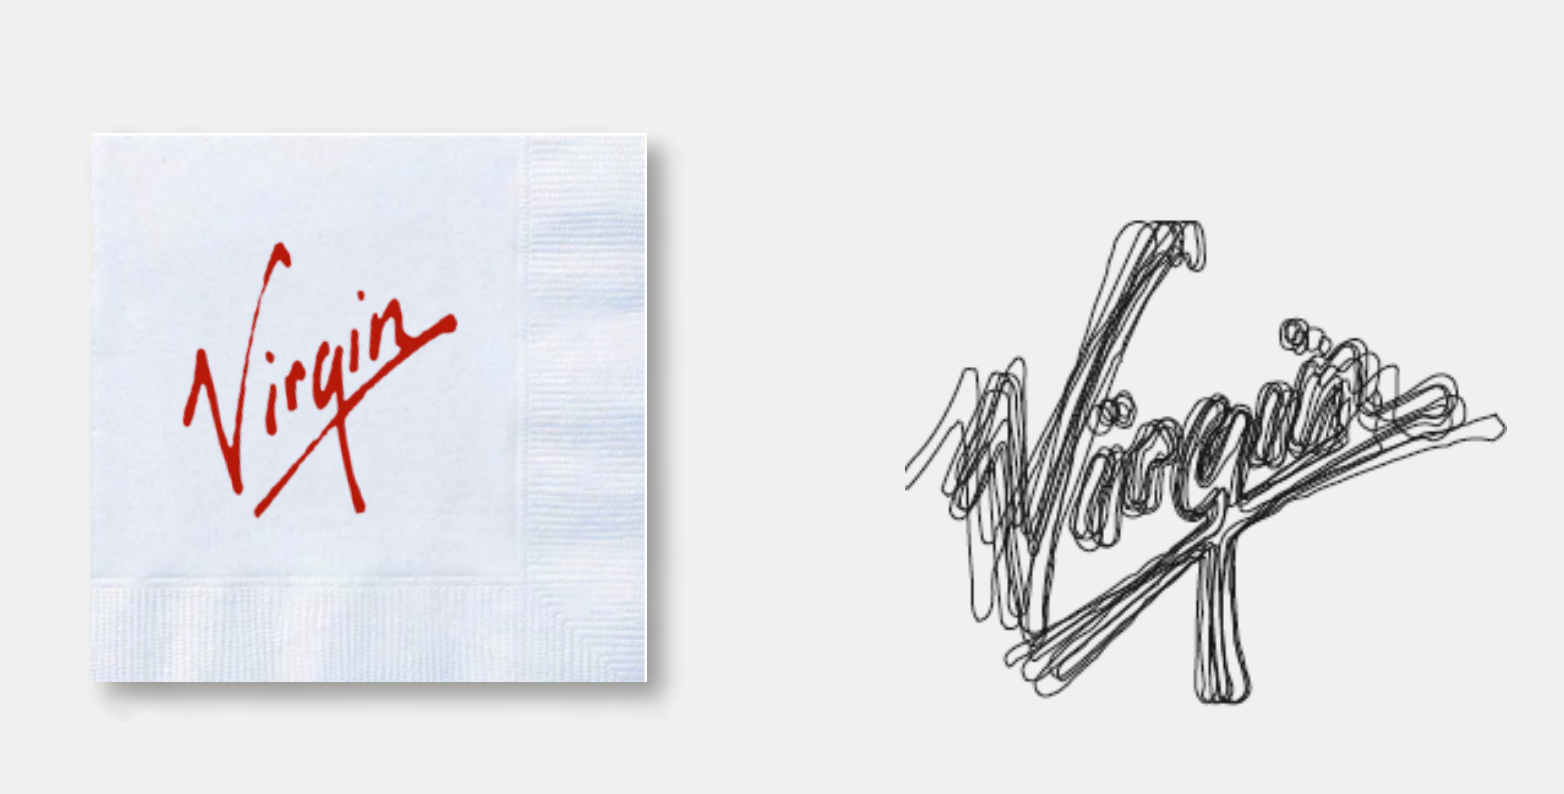 Virgin logo sketched and scribbled on a napkin